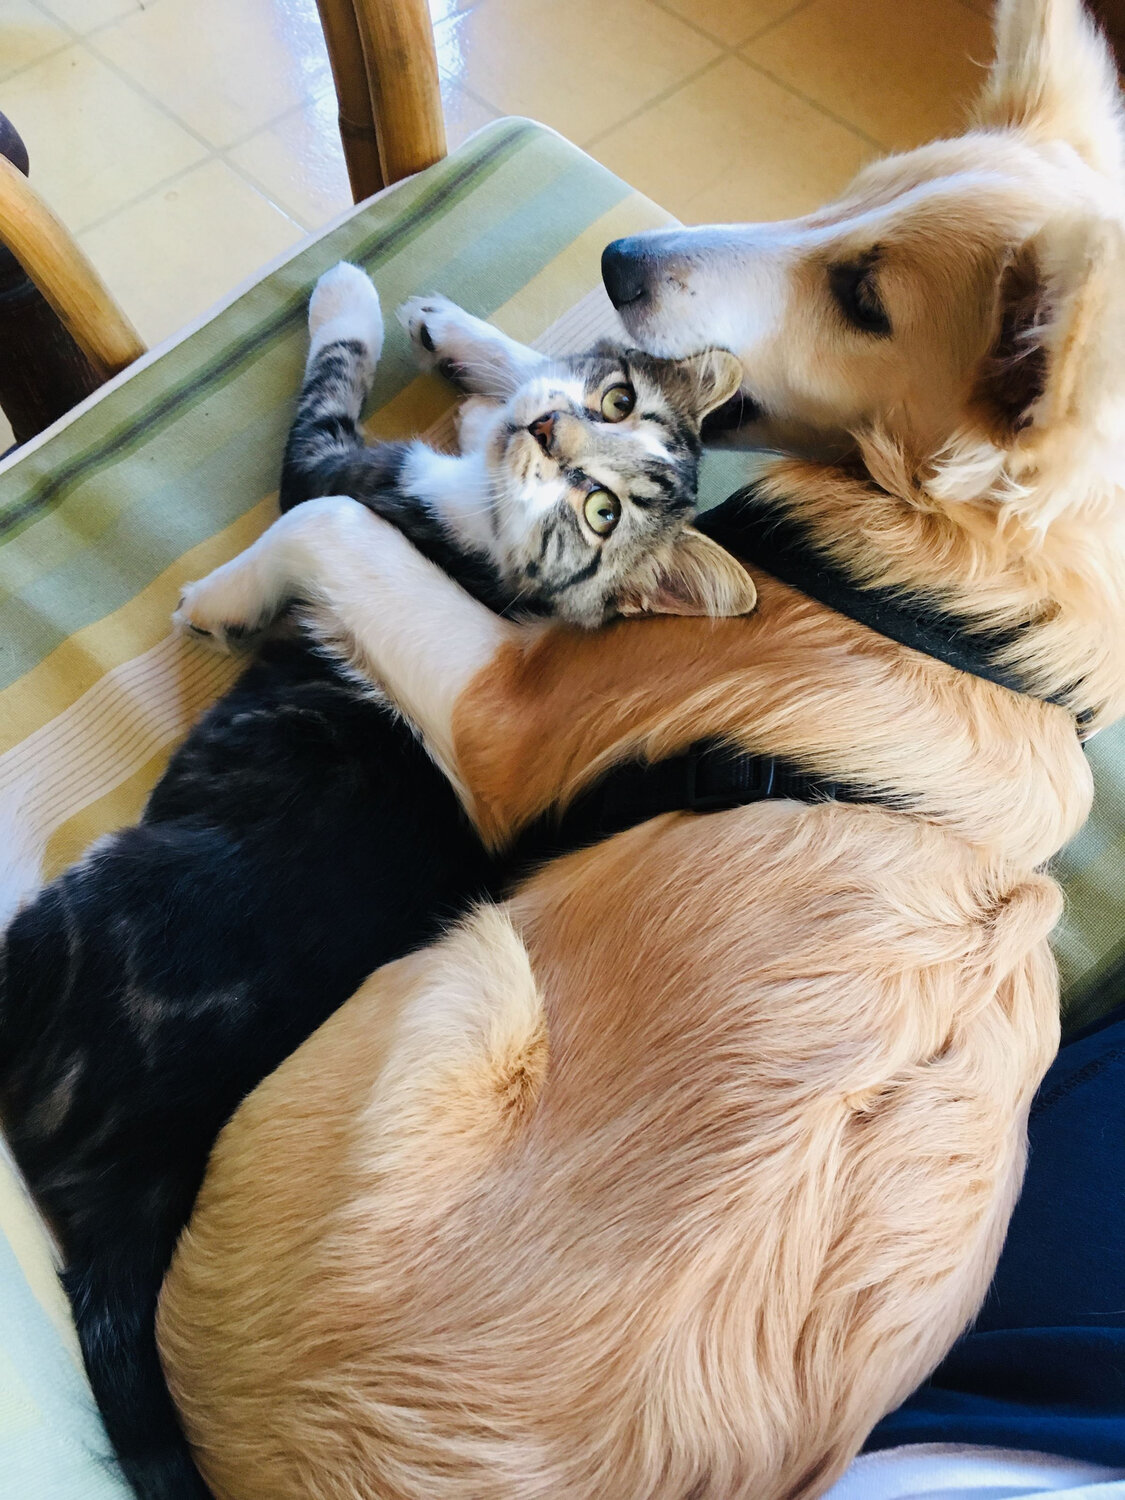 Stormy the cat and Stella the dog won the 2023 Maryland Star Pets Photo Contest. Photo by Barbara Outten of Crisfield, Md.